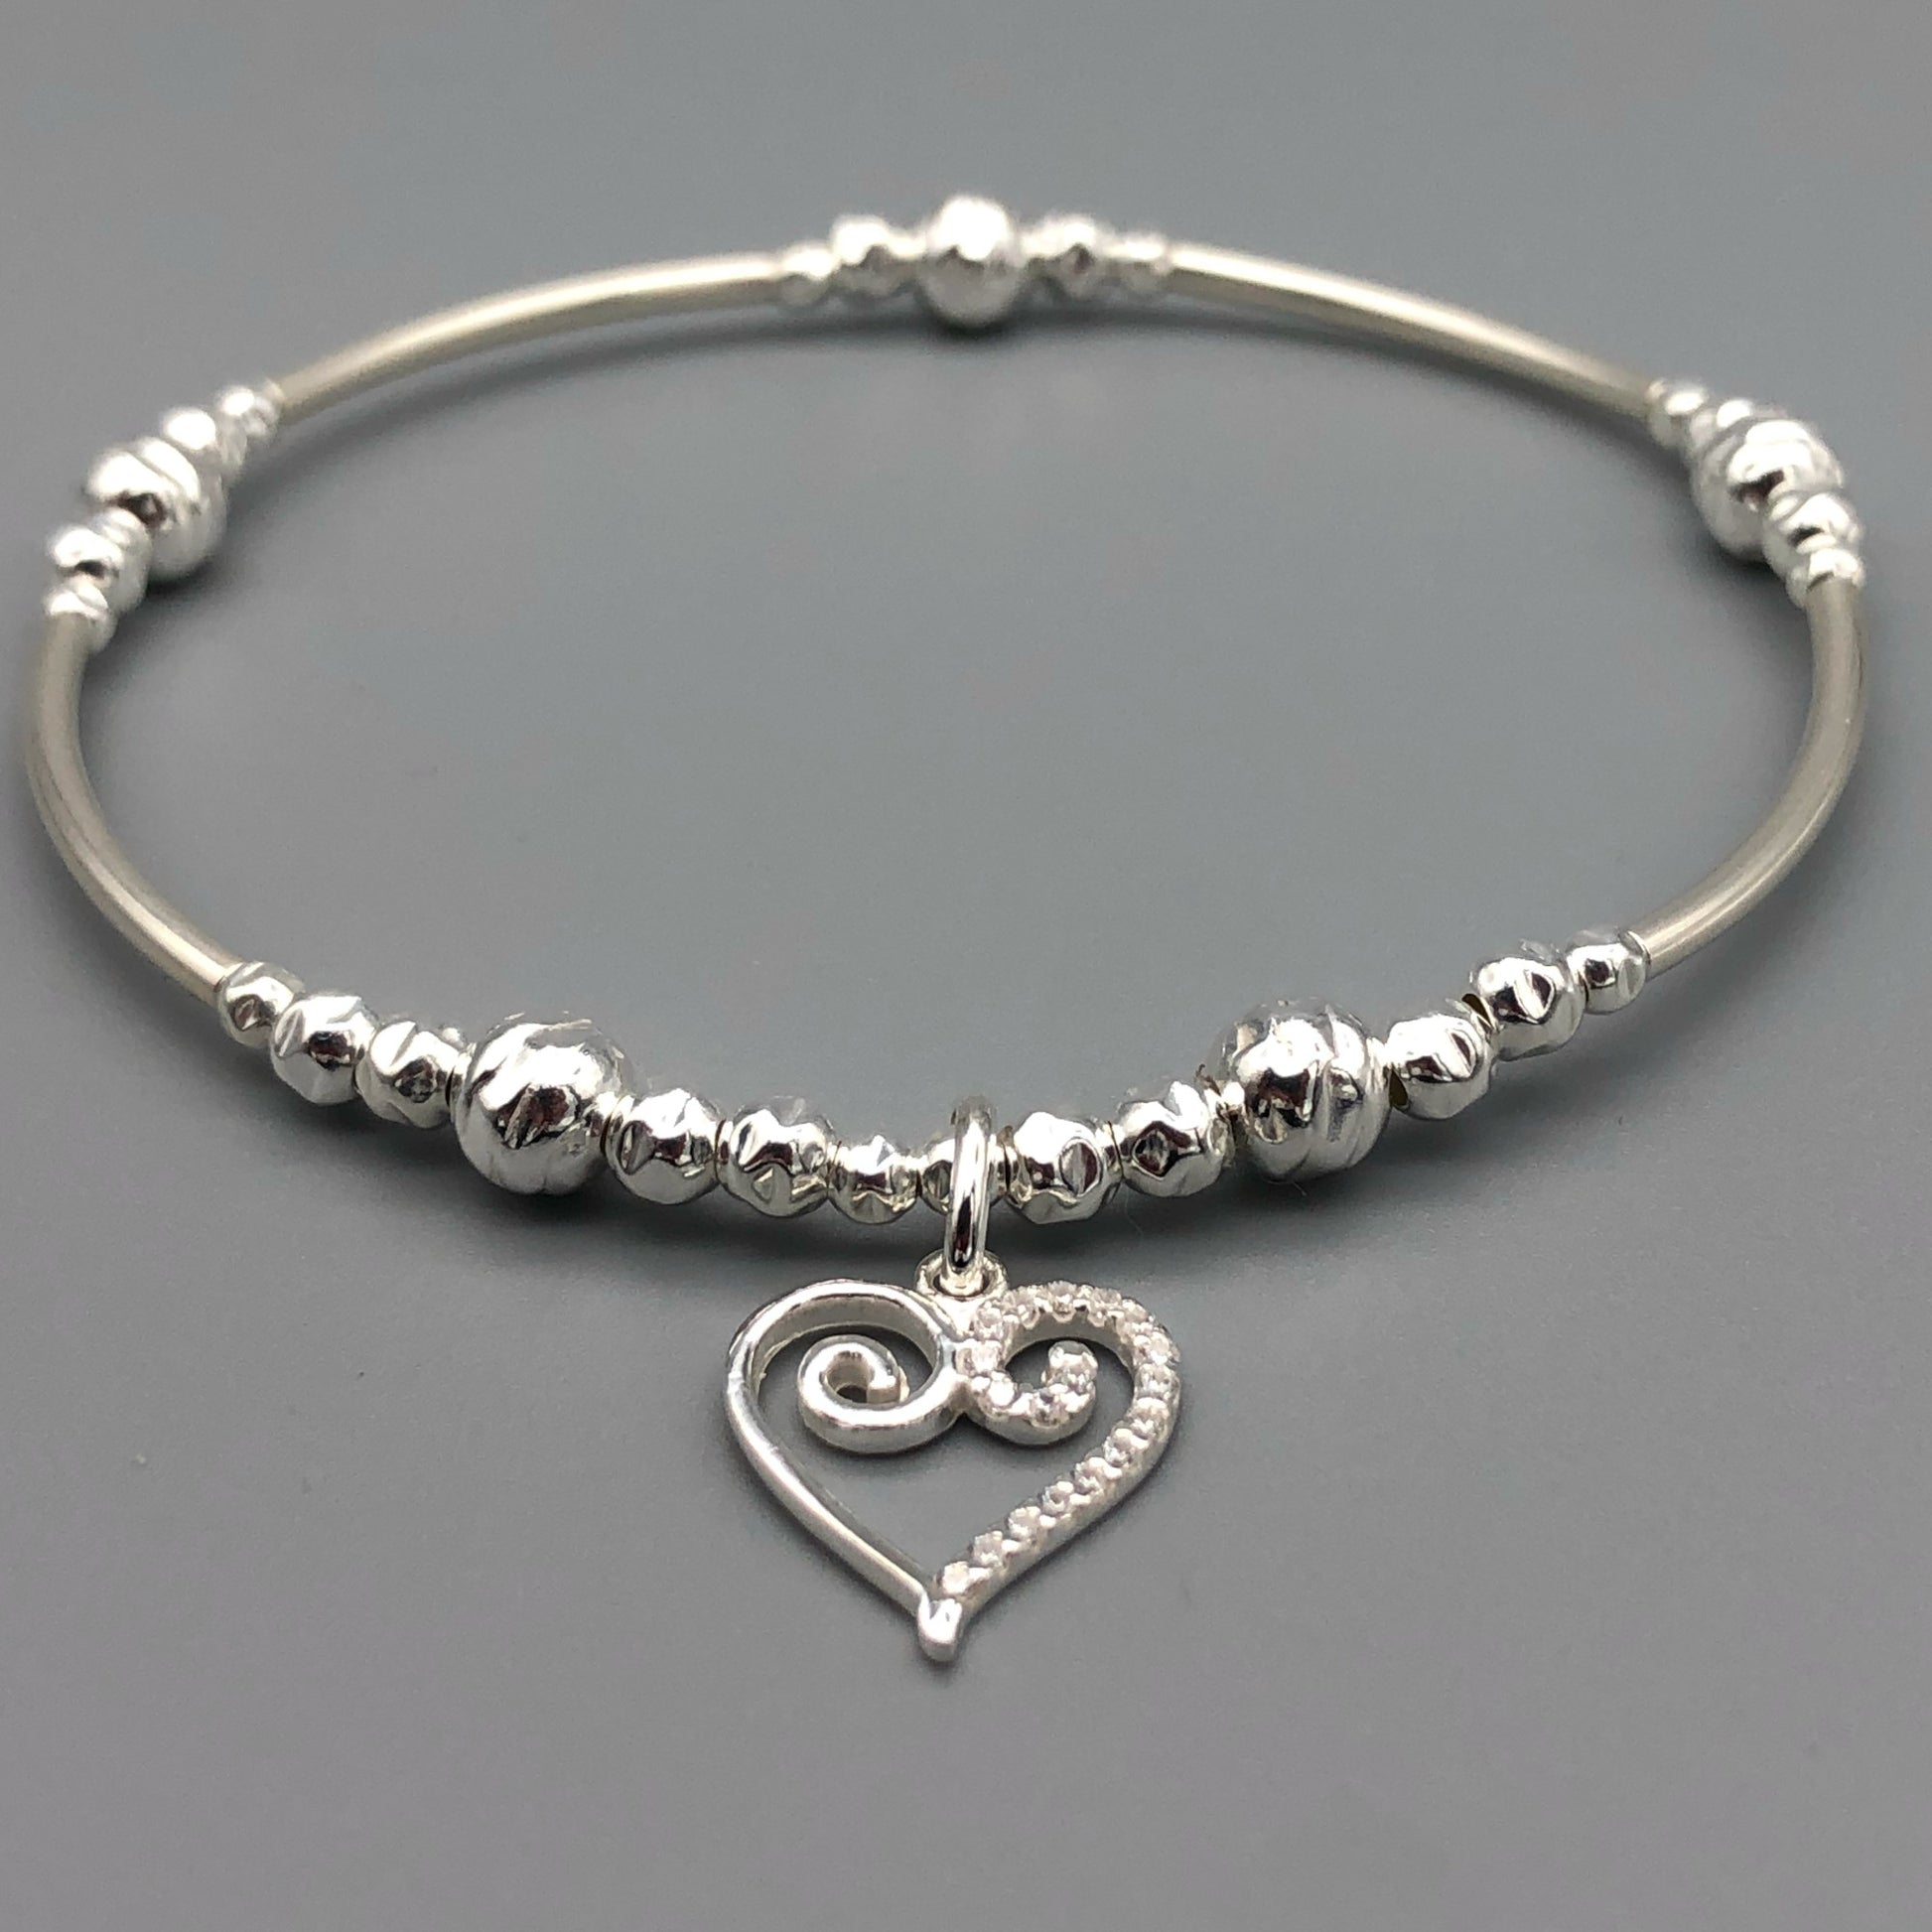 Scroll heart charm sterling silver hand-made women's stacking bracelet by My Silver Wish